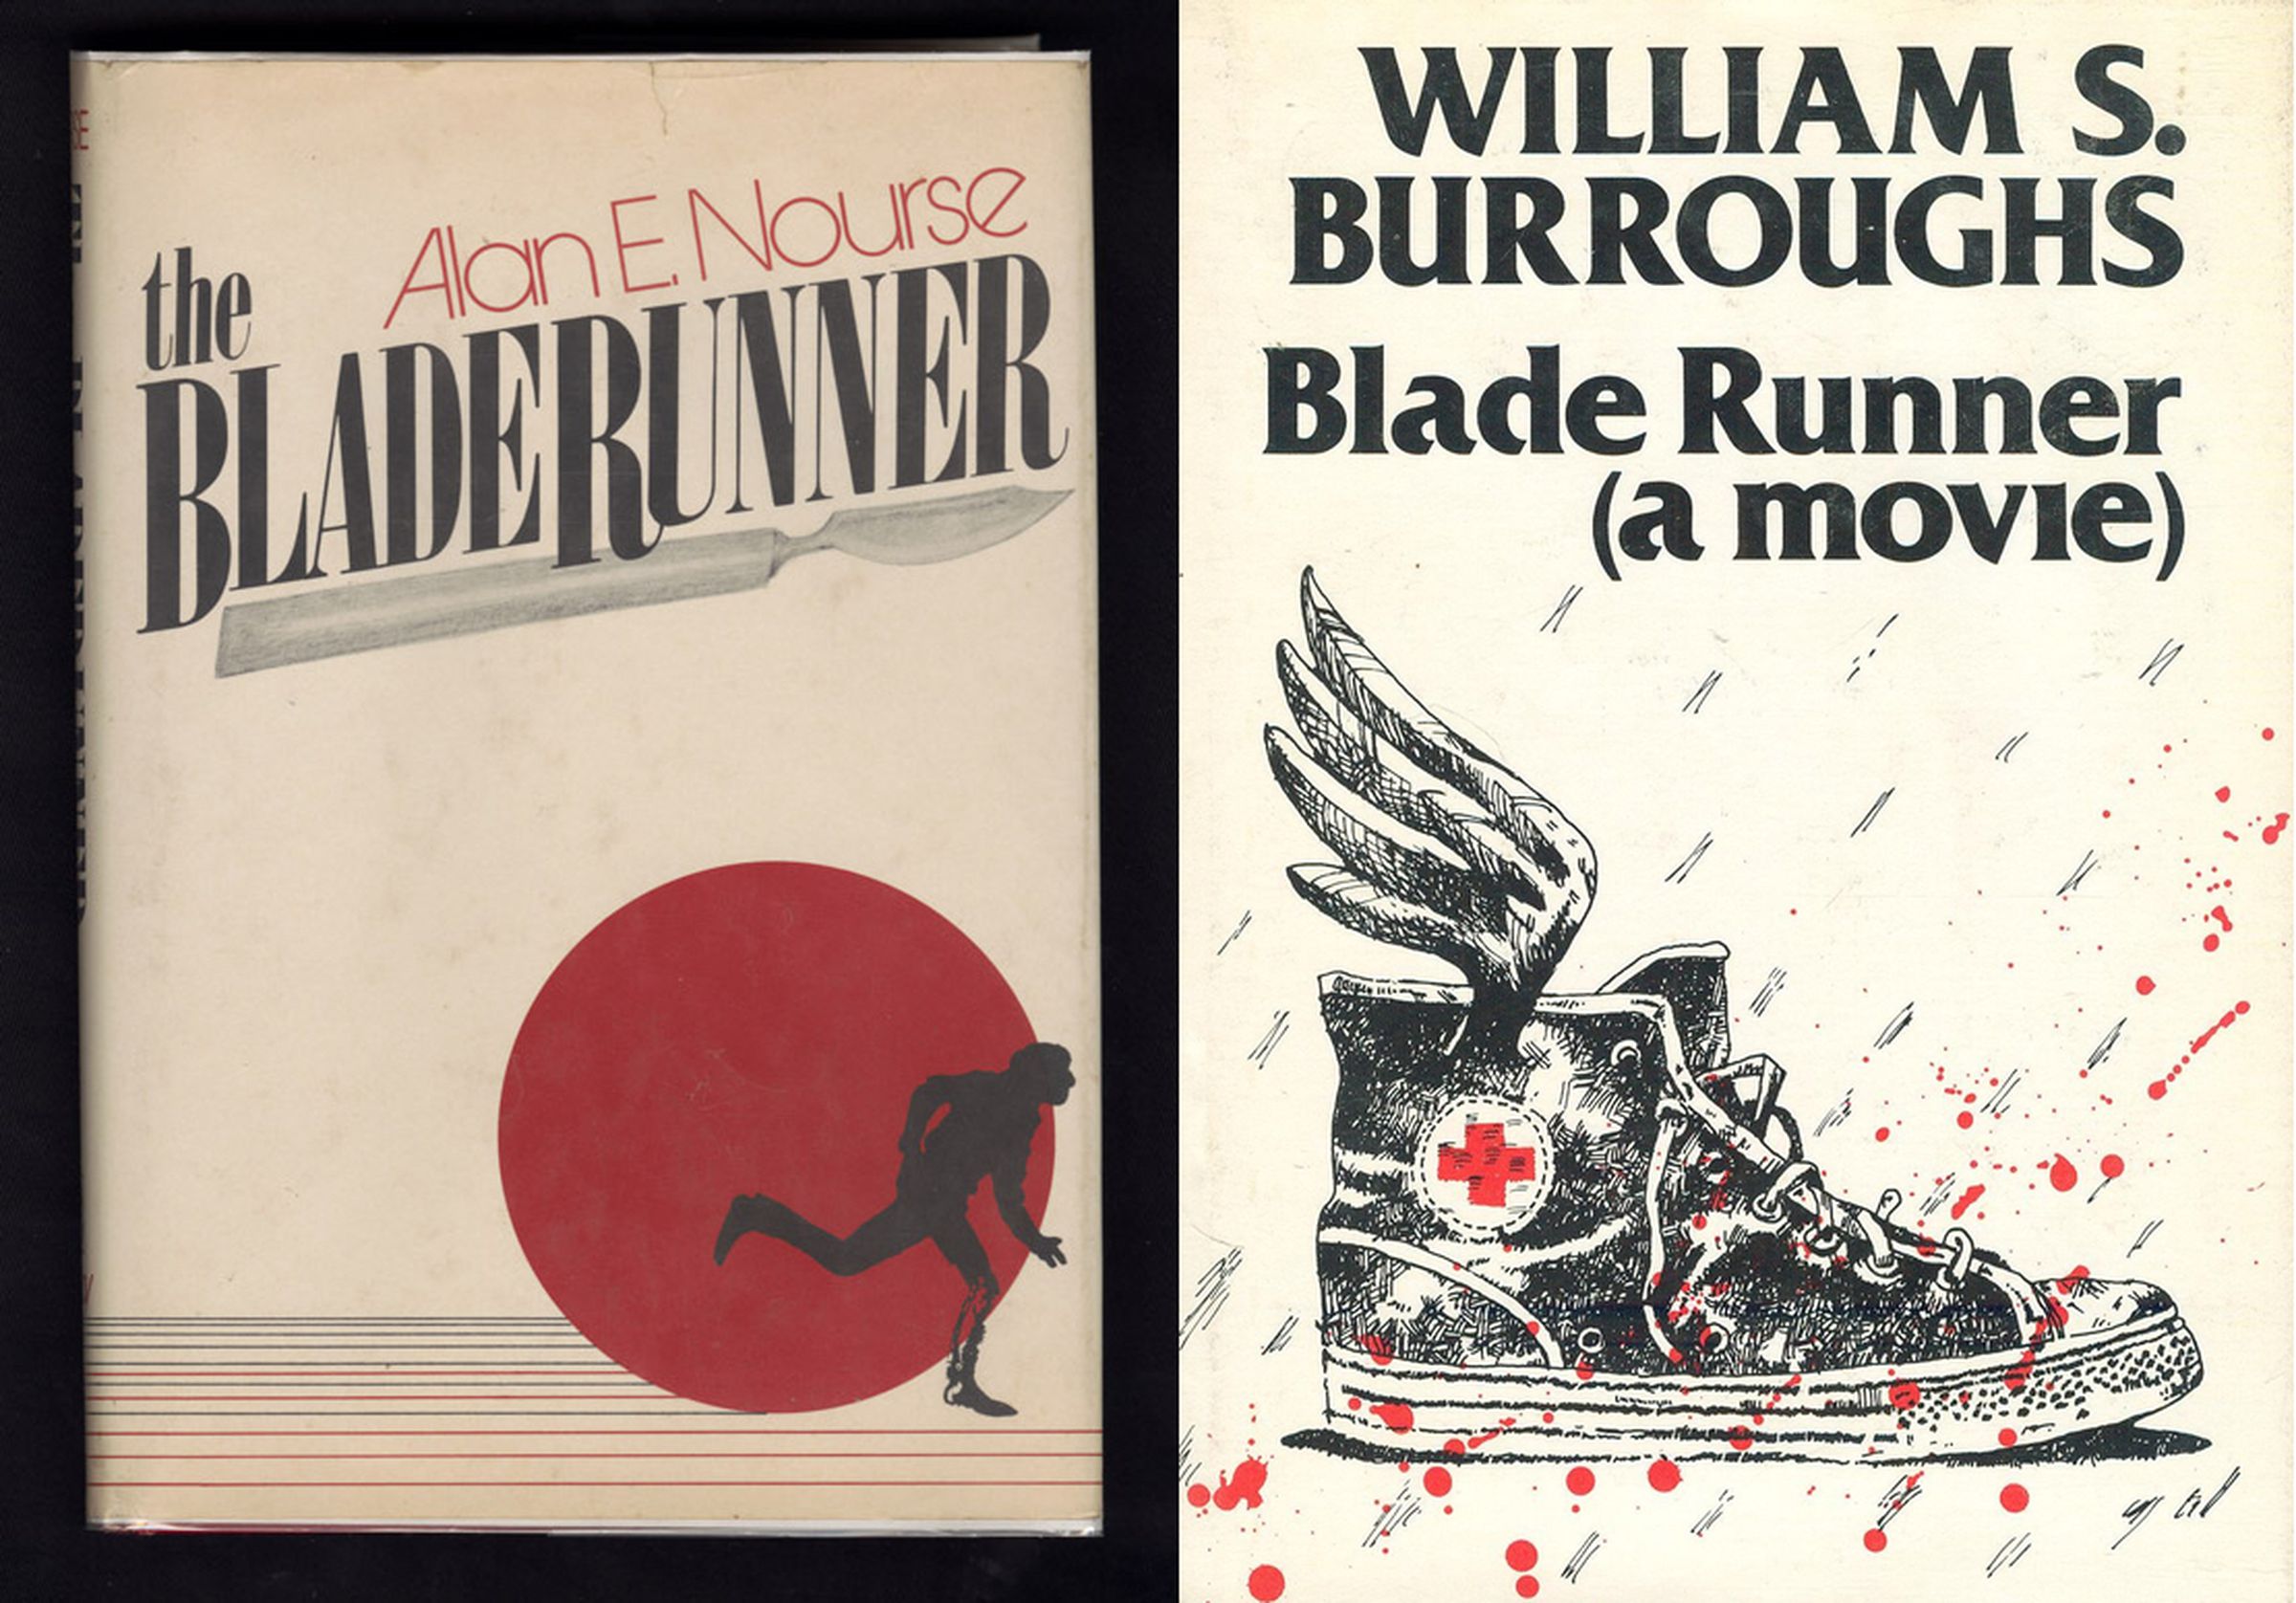 Blade Runner Nourse and Burroughs titles